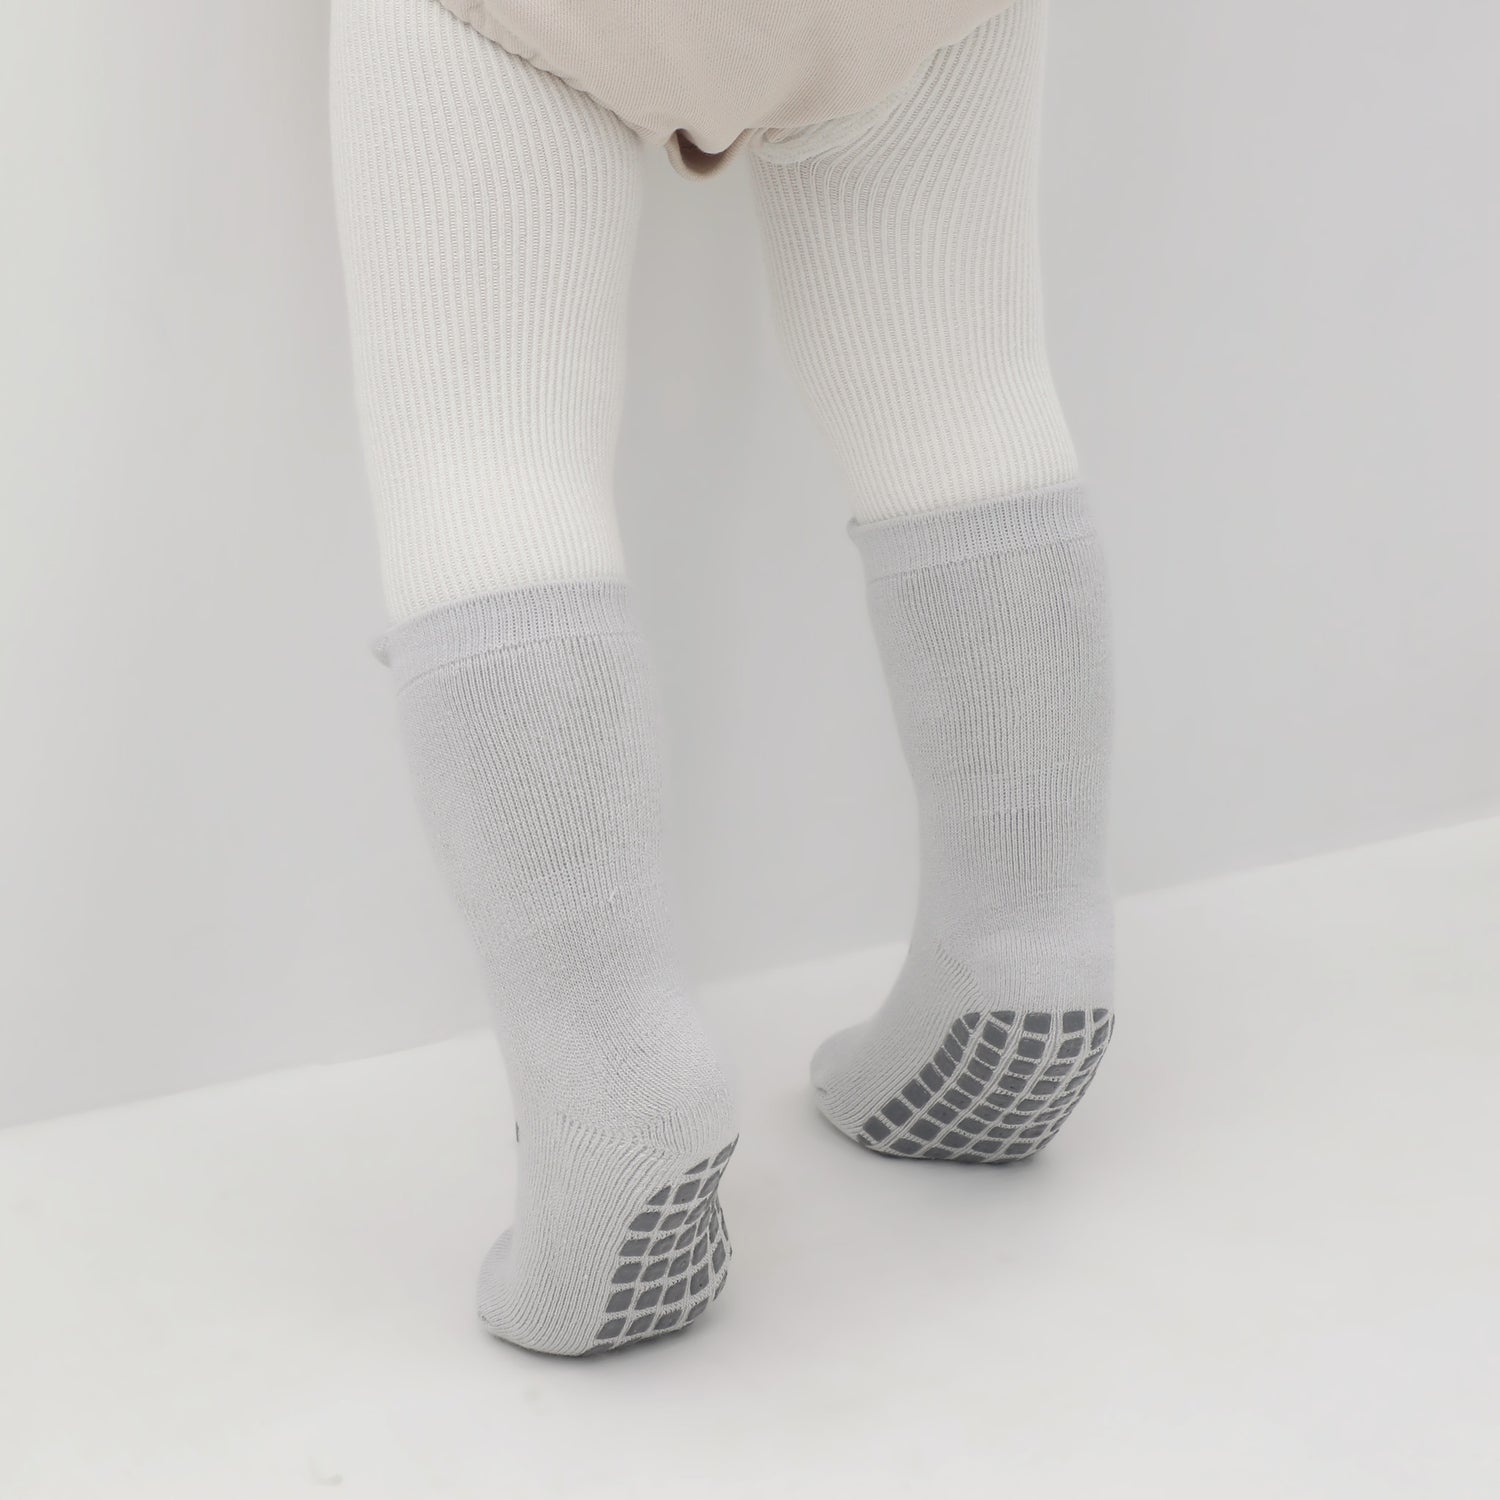 Adorable low-cut socks with anti-slip designs, perfect for toddlers exploring their surroundings.